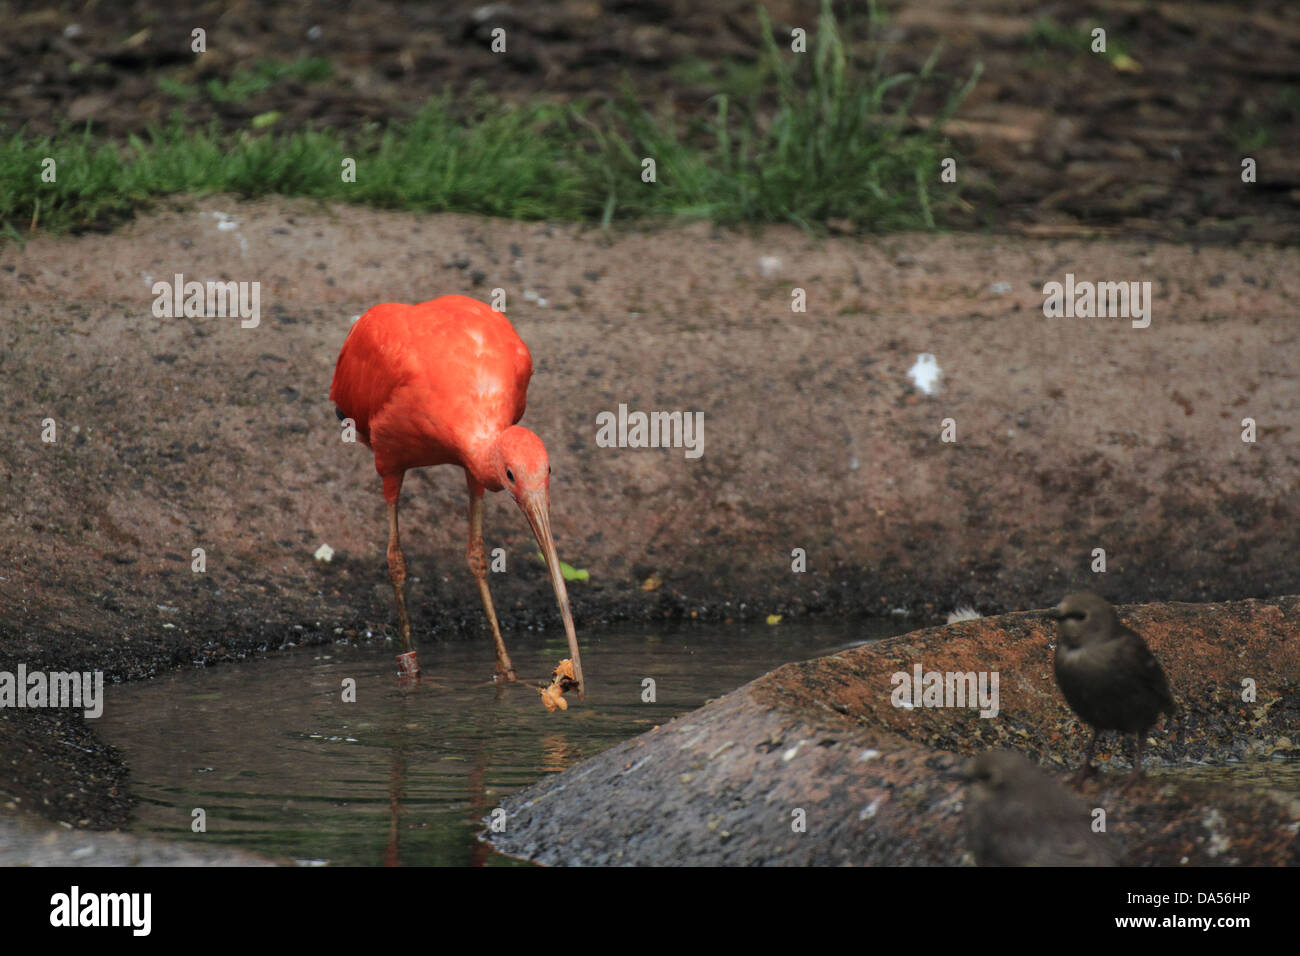 Scarlet Ibis (Eudocimus ruber) drinking from a pond. Stock Photo